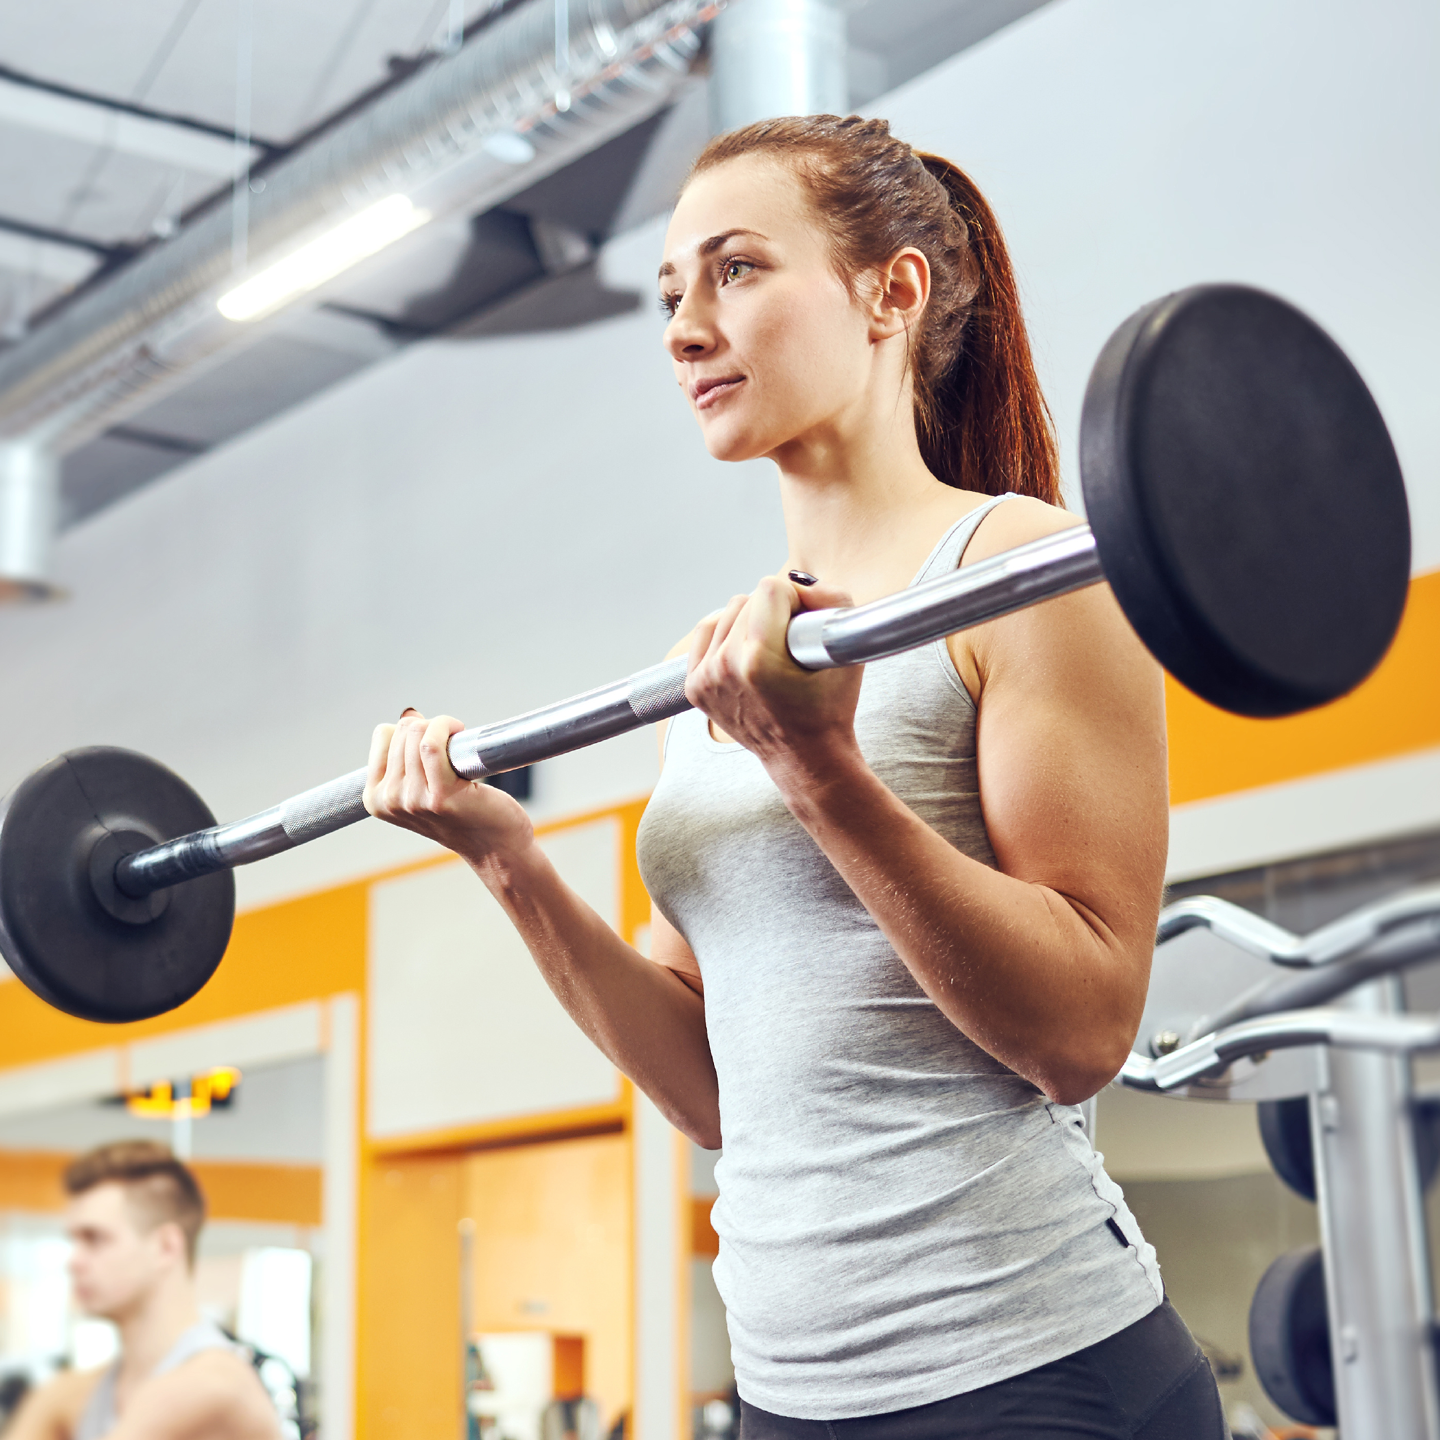 A Caucasian female in her twenties is captured lifting a bar bell. She is wearing a grey tank top and her hair is in a high pony tail. There is a Caucasian male captured to the left of the frame also working out in the gym at the YMCA.